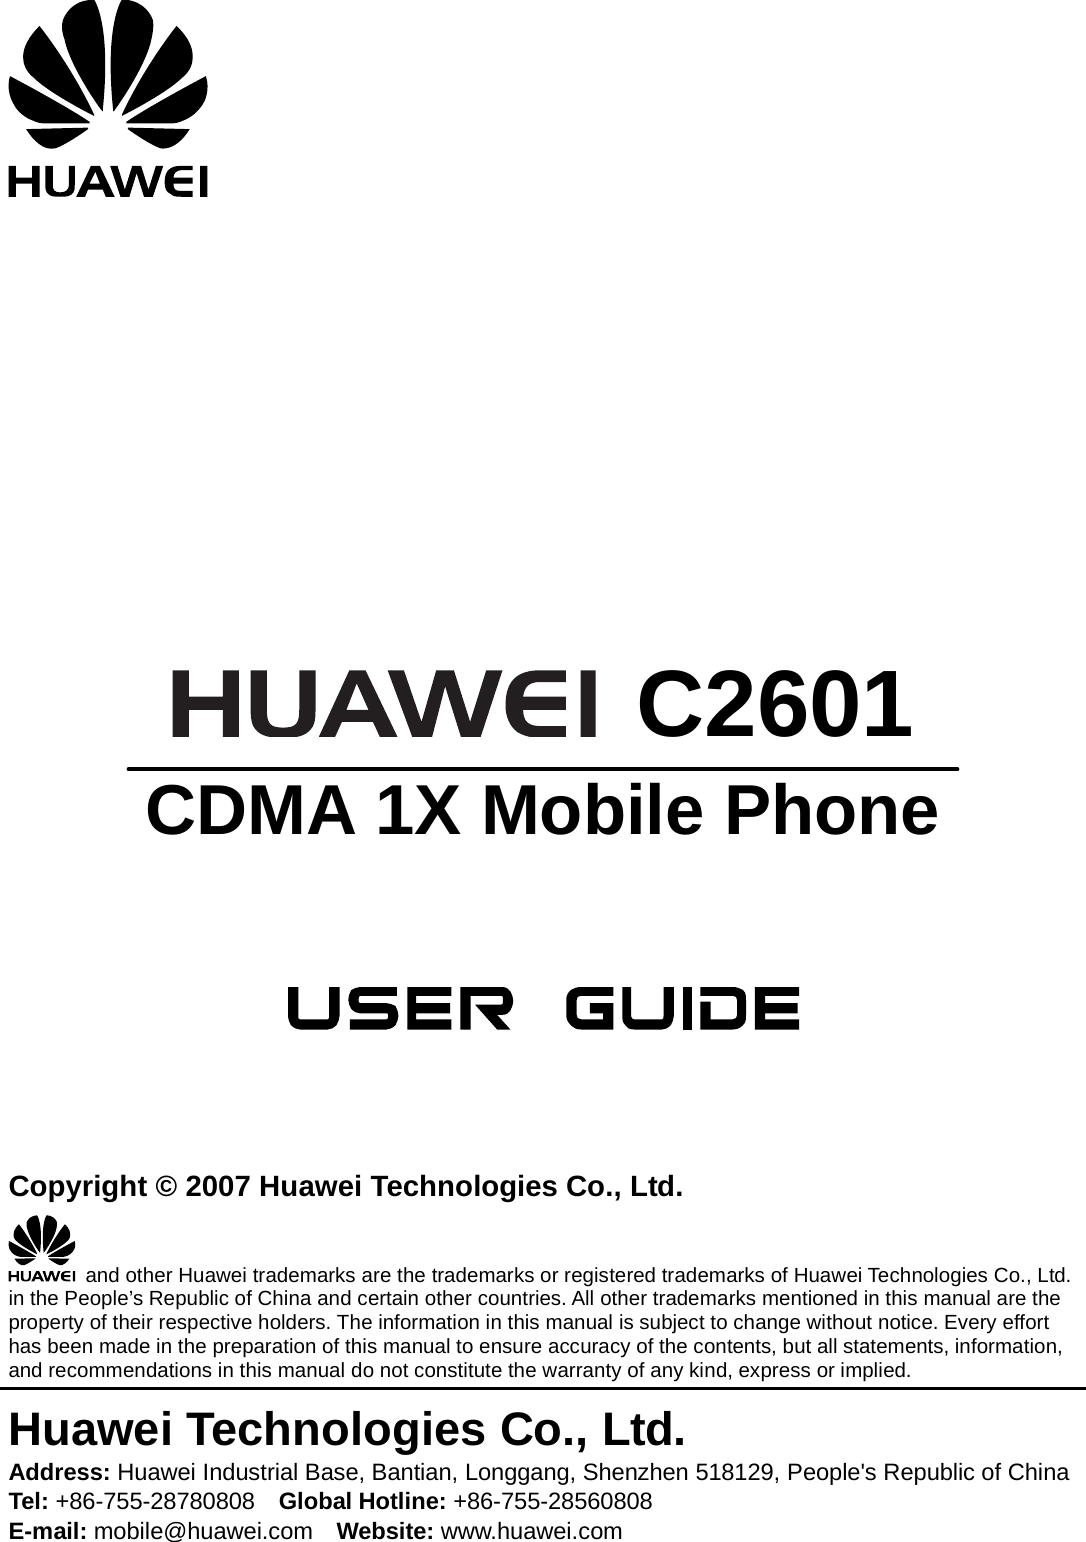          C2601 CDMA 1X Mobile Phone      Copyright © 2007 Huawei Technologies Co., Ltd.   and other Huawei trademarks are the trademarks or registered trademarks of Huawei Technologies Co., Ltd. in the People’s Republic of China and certain other countries. All other trademarks mentioned in this manual are the property of their respective holders. The information in this manual is subject to change without notice. Every effort has been made in the preparation of this manual to ensure accuracy of the contents, but all statements, information, and recommendations in this manual do not constitute the warranty of any kind, express or implied. Huawei Technologies Co., Ltd. Address: Huawei Industrial Base, Bantian, Longgang, Shenzhen 518129, People&apos;s Republic of China Tel: +86-755-28780808    Global Hotline: +86-755-28560808 E-mail: mobile@huawei.com    Website: www.huawei.com 